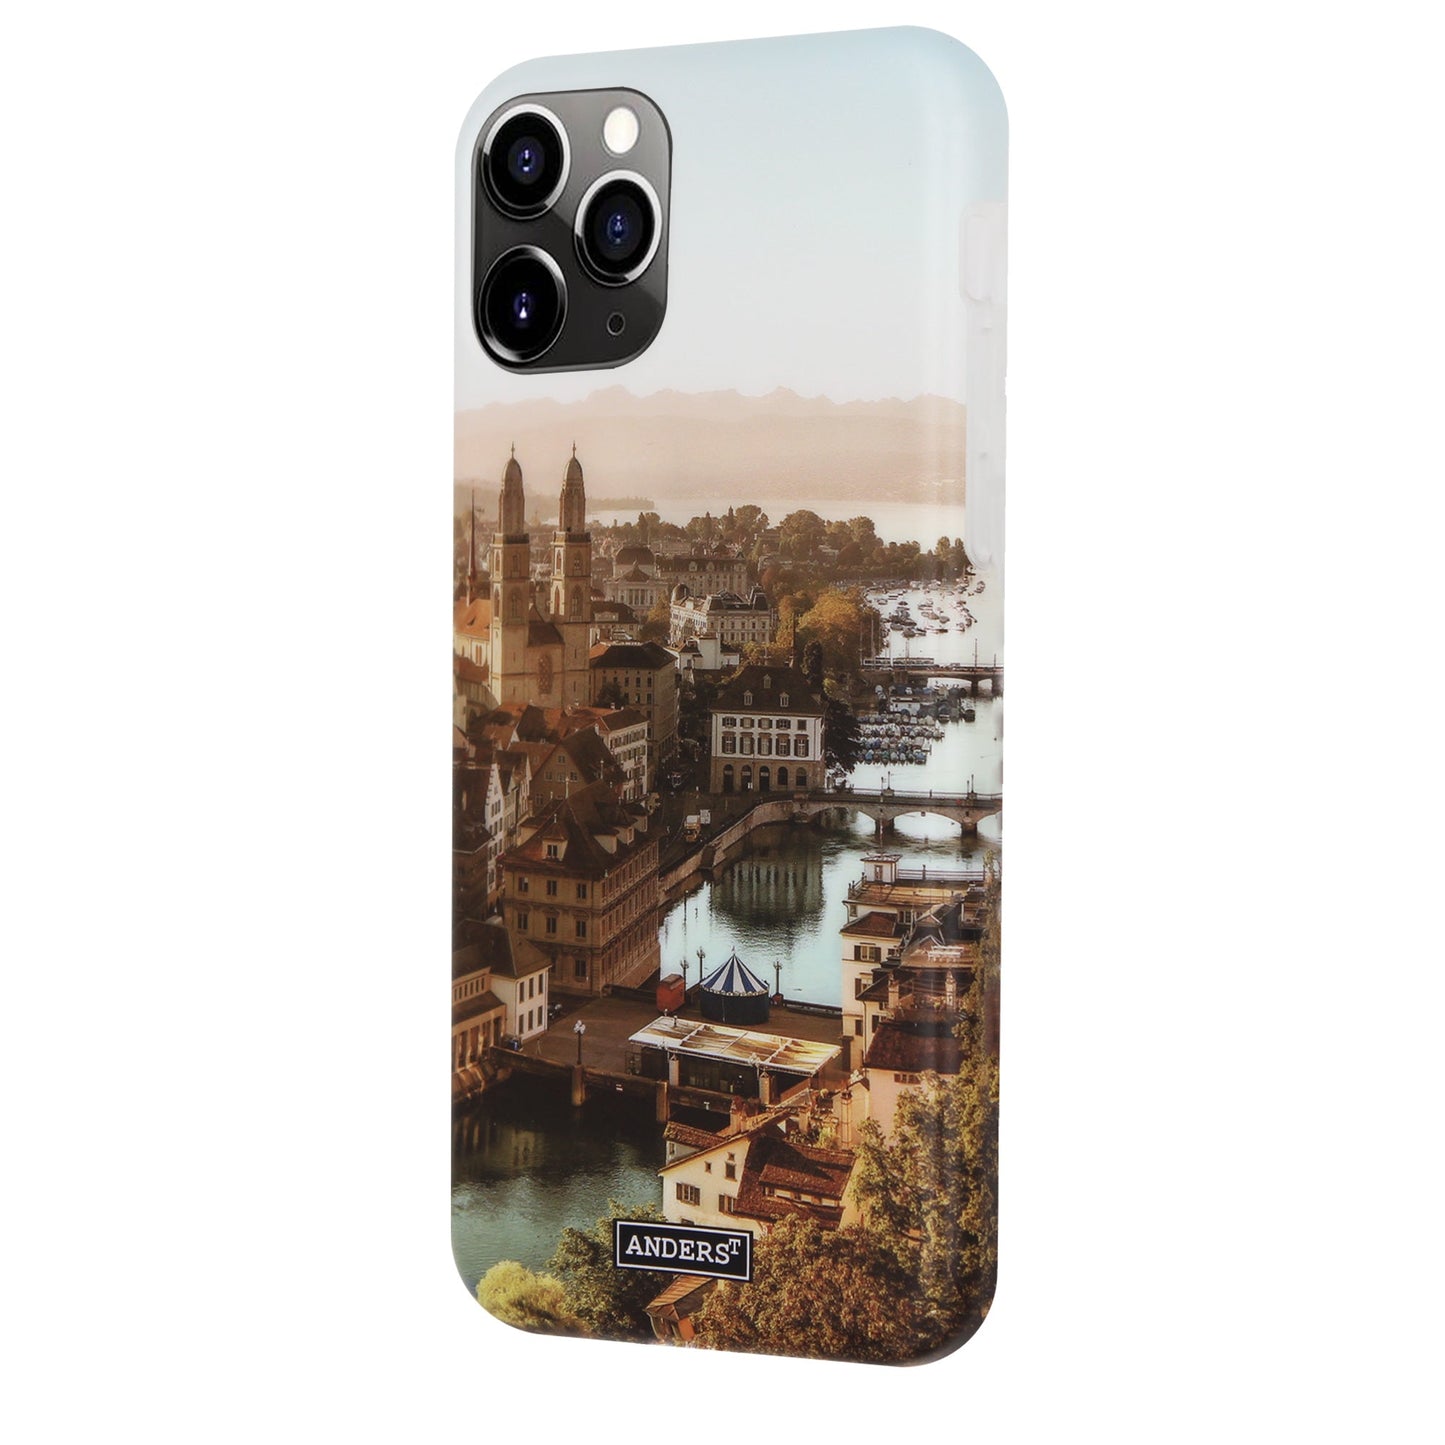 Zurich City from Above 360° Case for iPhone 11 Pro